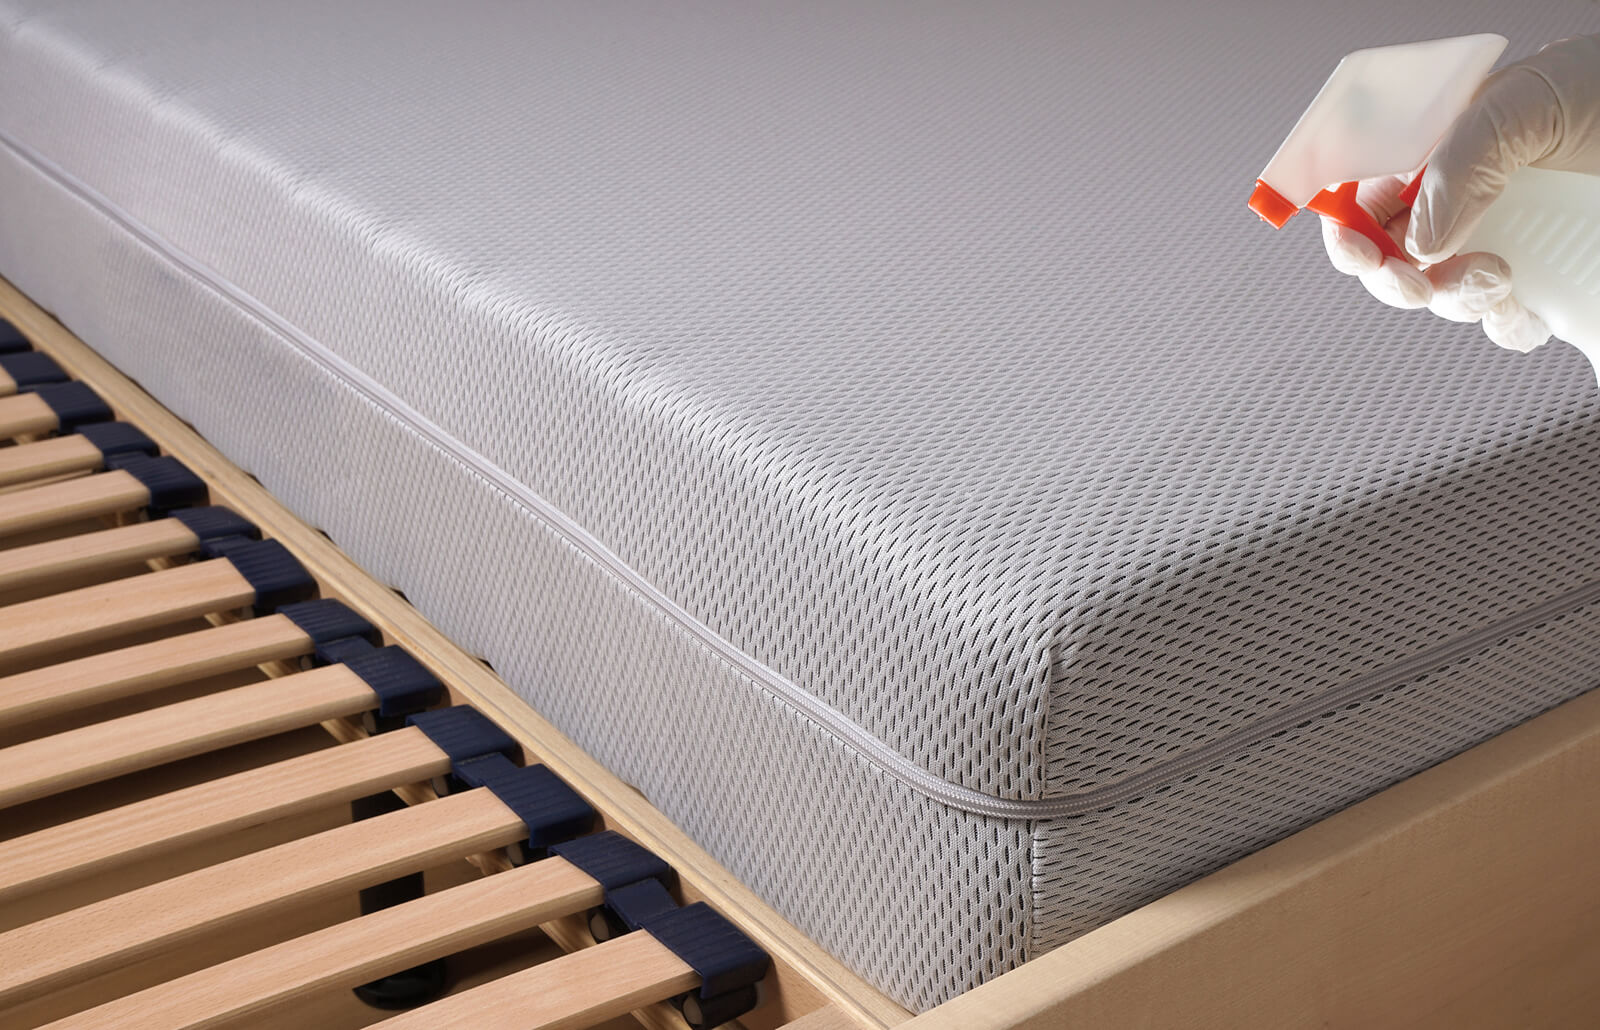 How To Clean A Mattress With Vinegar